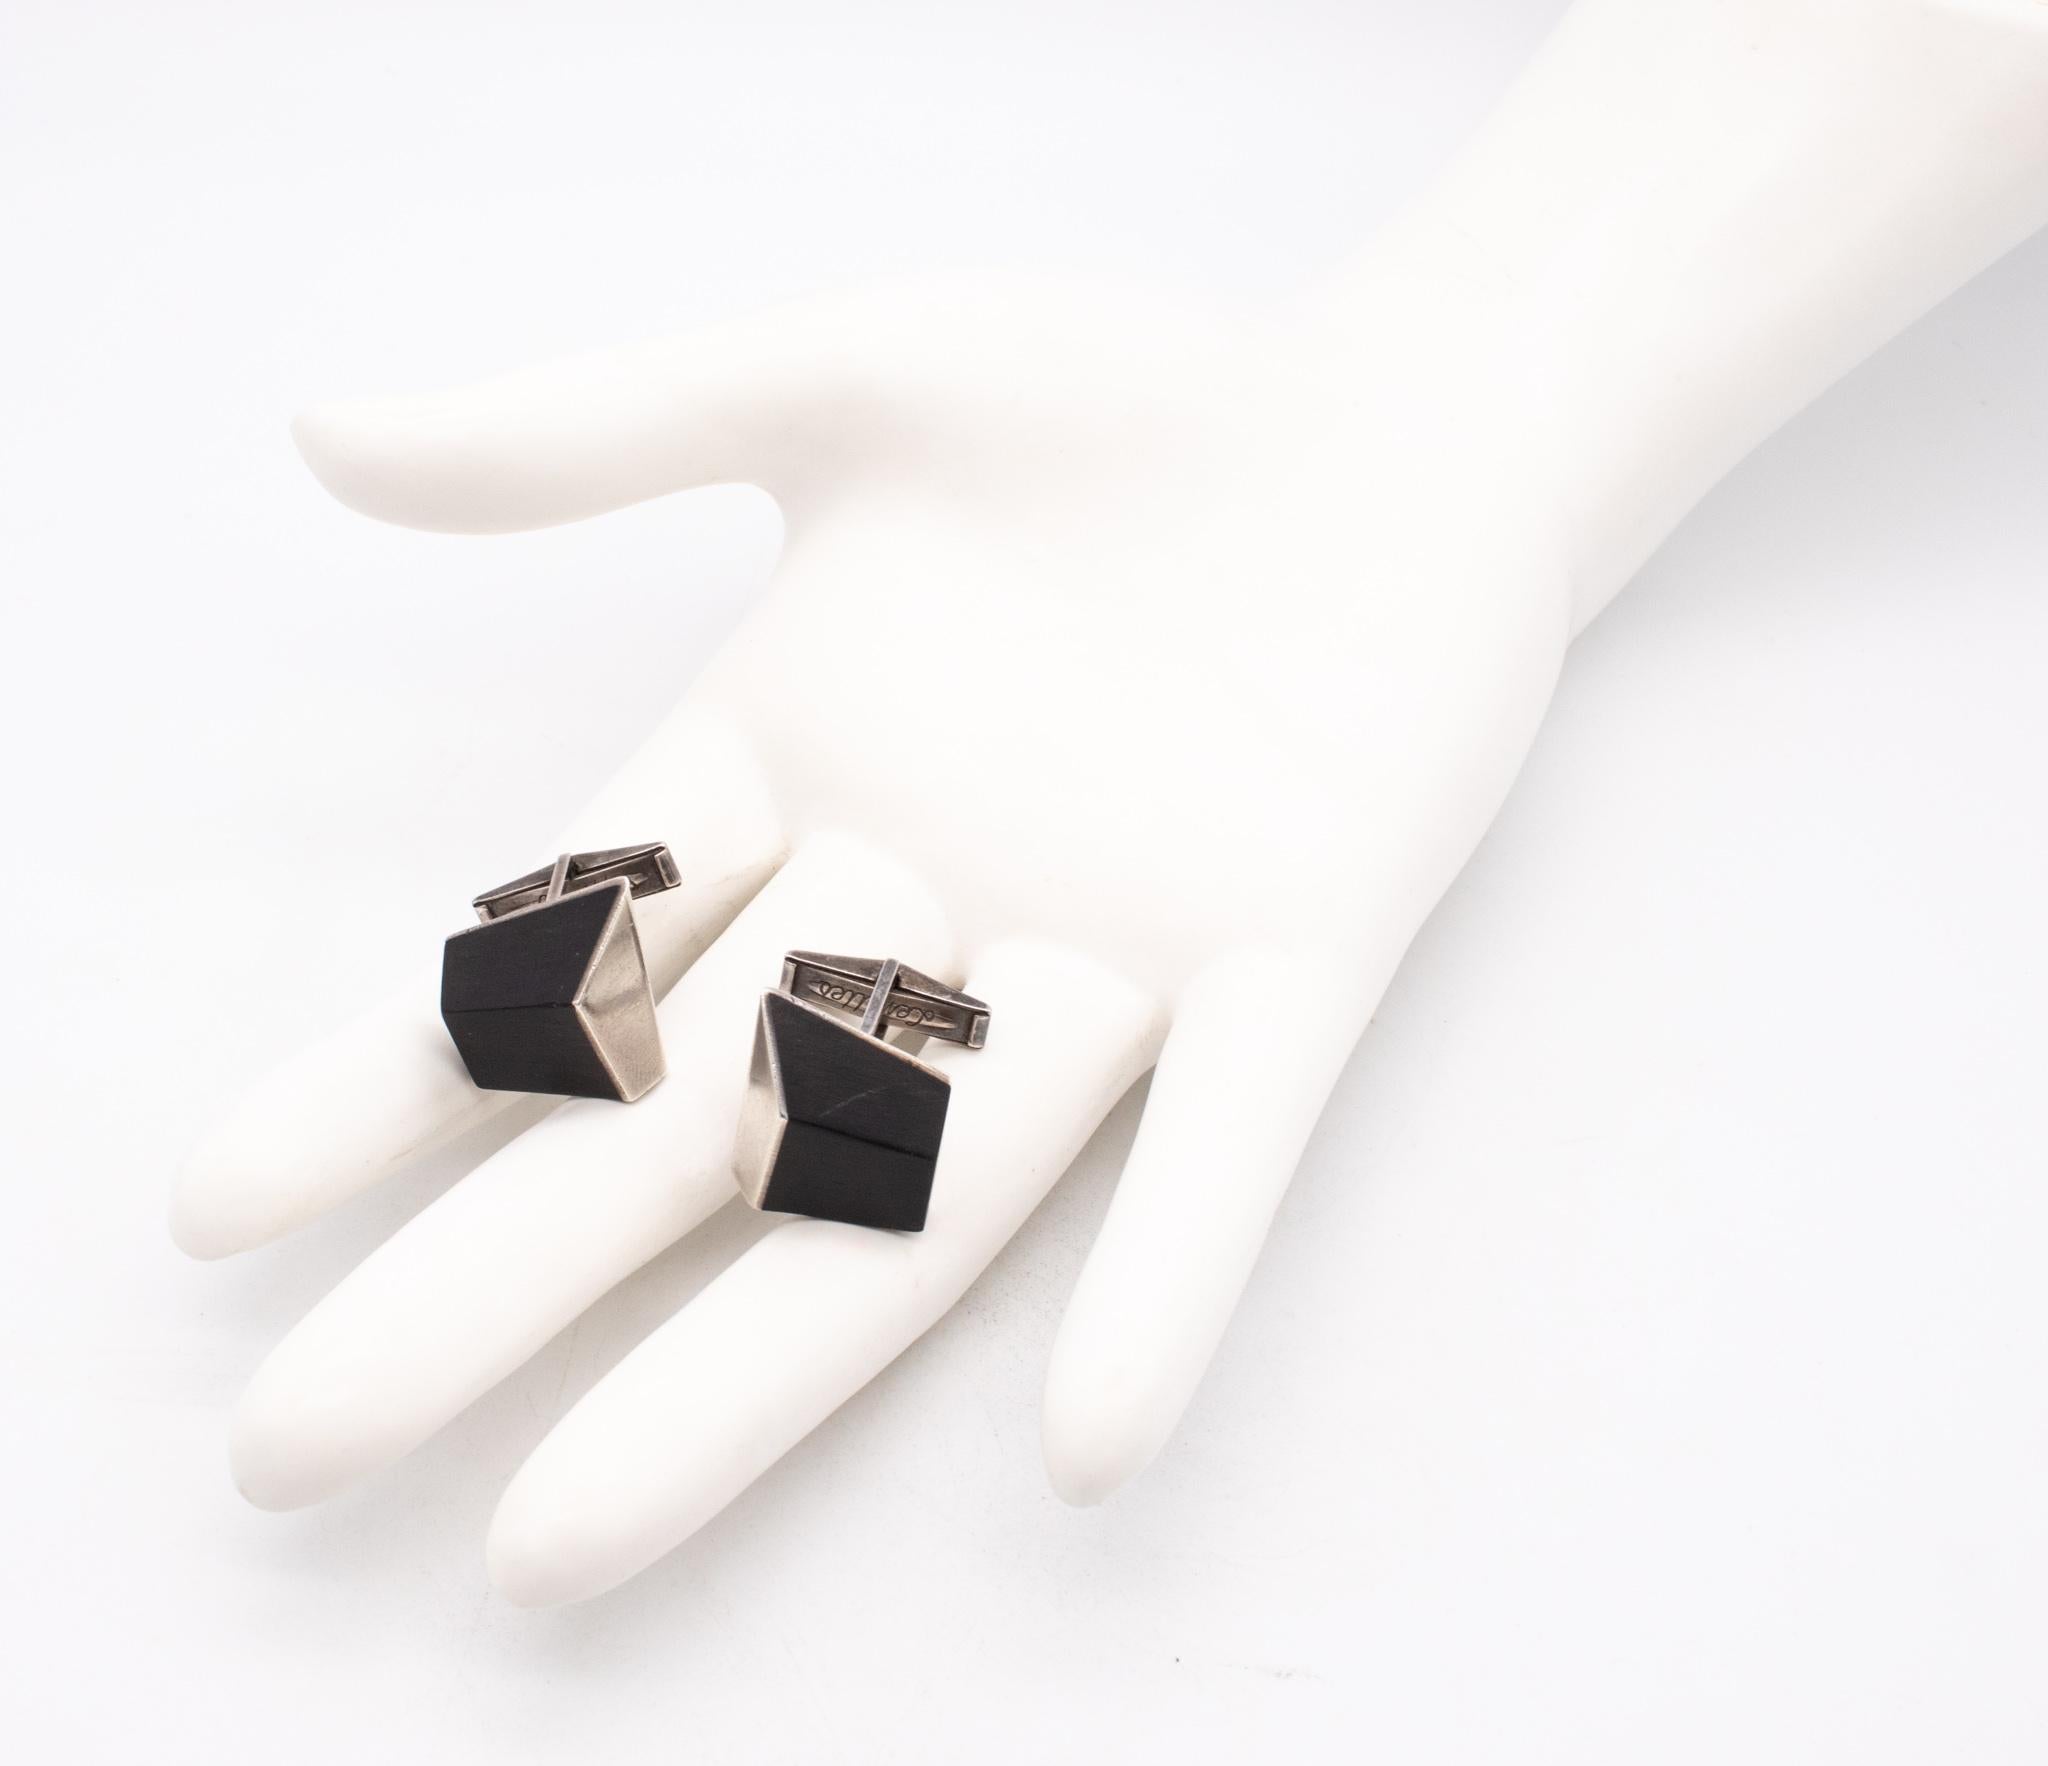 Geometric pair of ebony wood cufflinks designed by Esther Lewittes.

Very modernist geometric op-art pair of cufflinks, made in America by the jewelry artist Esther Lewittes, back in the 1950. Crafted with three dimensional patterns in solid